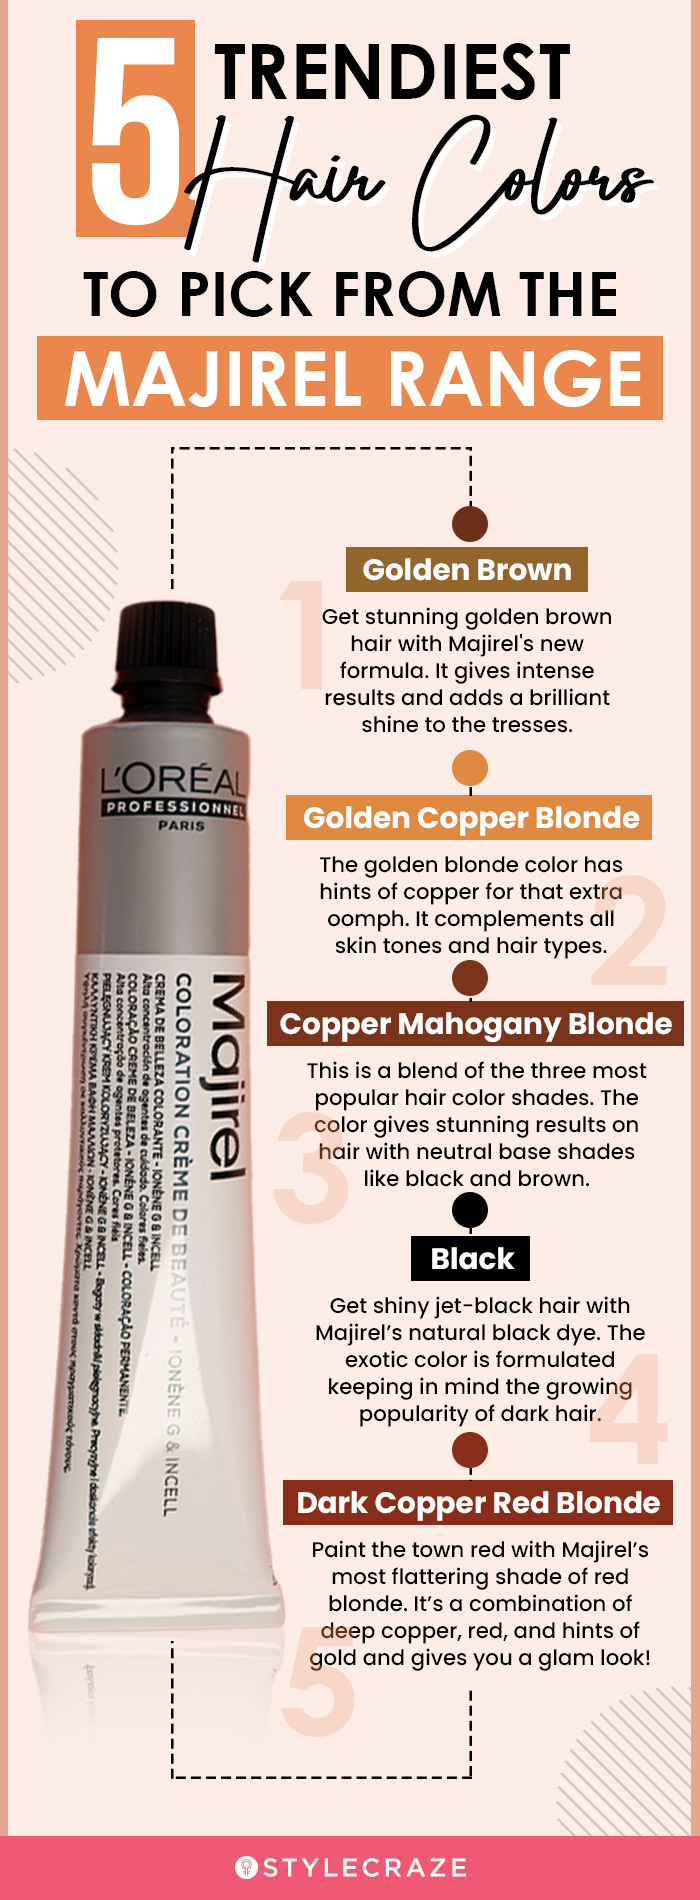 5 trendiest hair colors to pick from the majirel range (infographic)